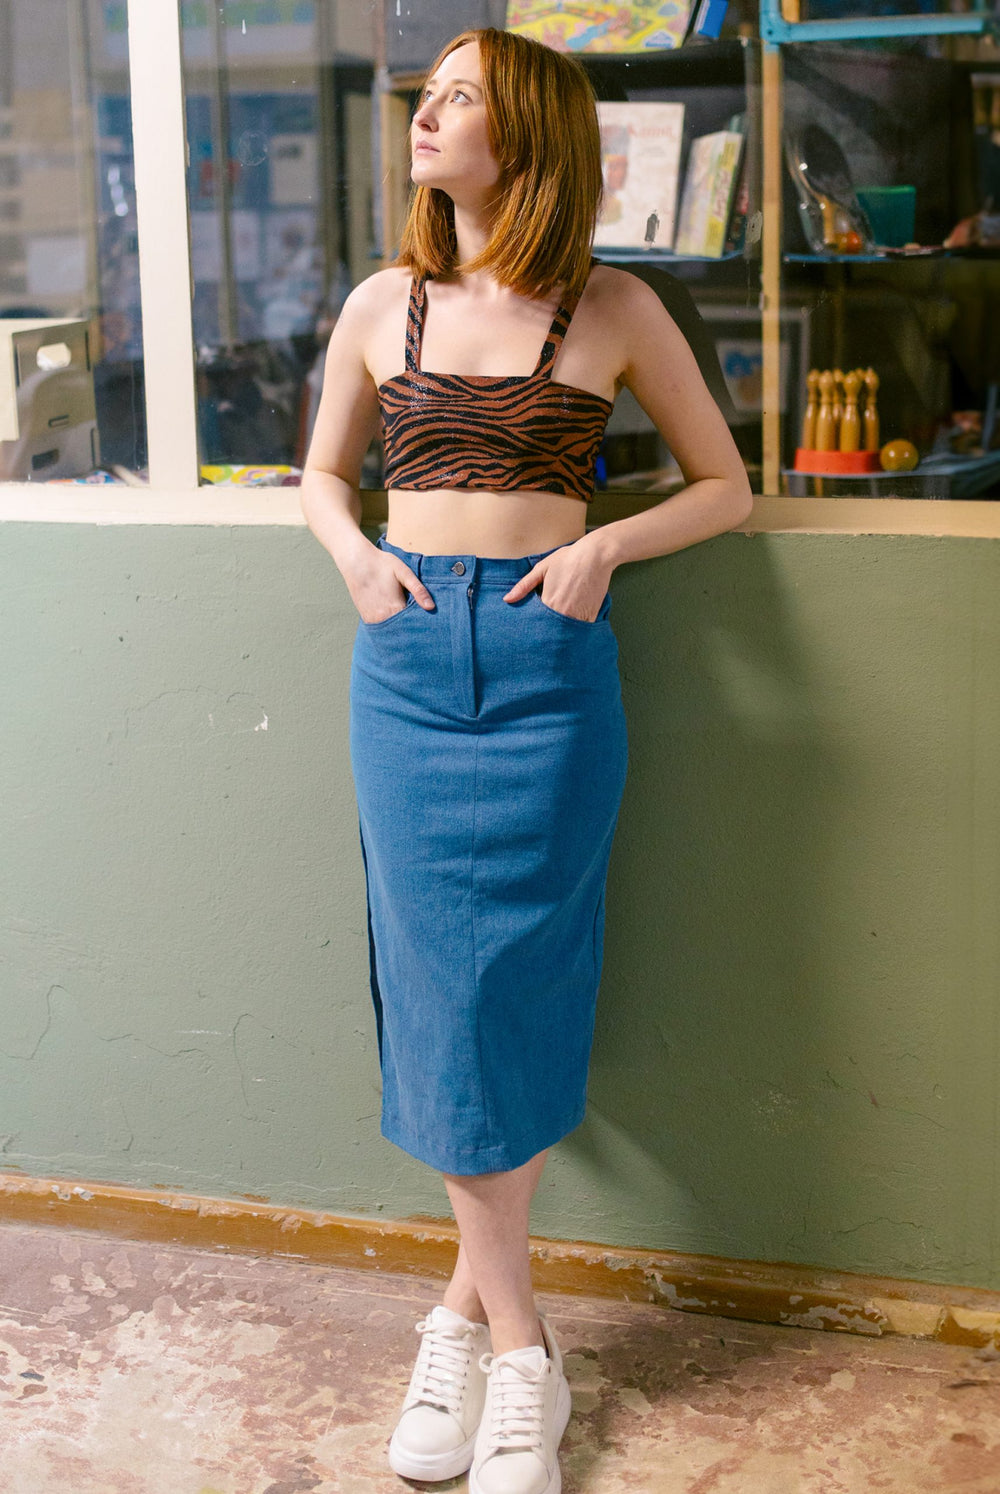 Woman wearing the Frida Skirt sewing pattern from JULIANA MARTEJEVS on The Fold Line. A denim skirt pattern made in stretch denim fabrics, featuring a midi length, straight silhouette, fly front closure, pockets, topstitching, and high slit in the side se